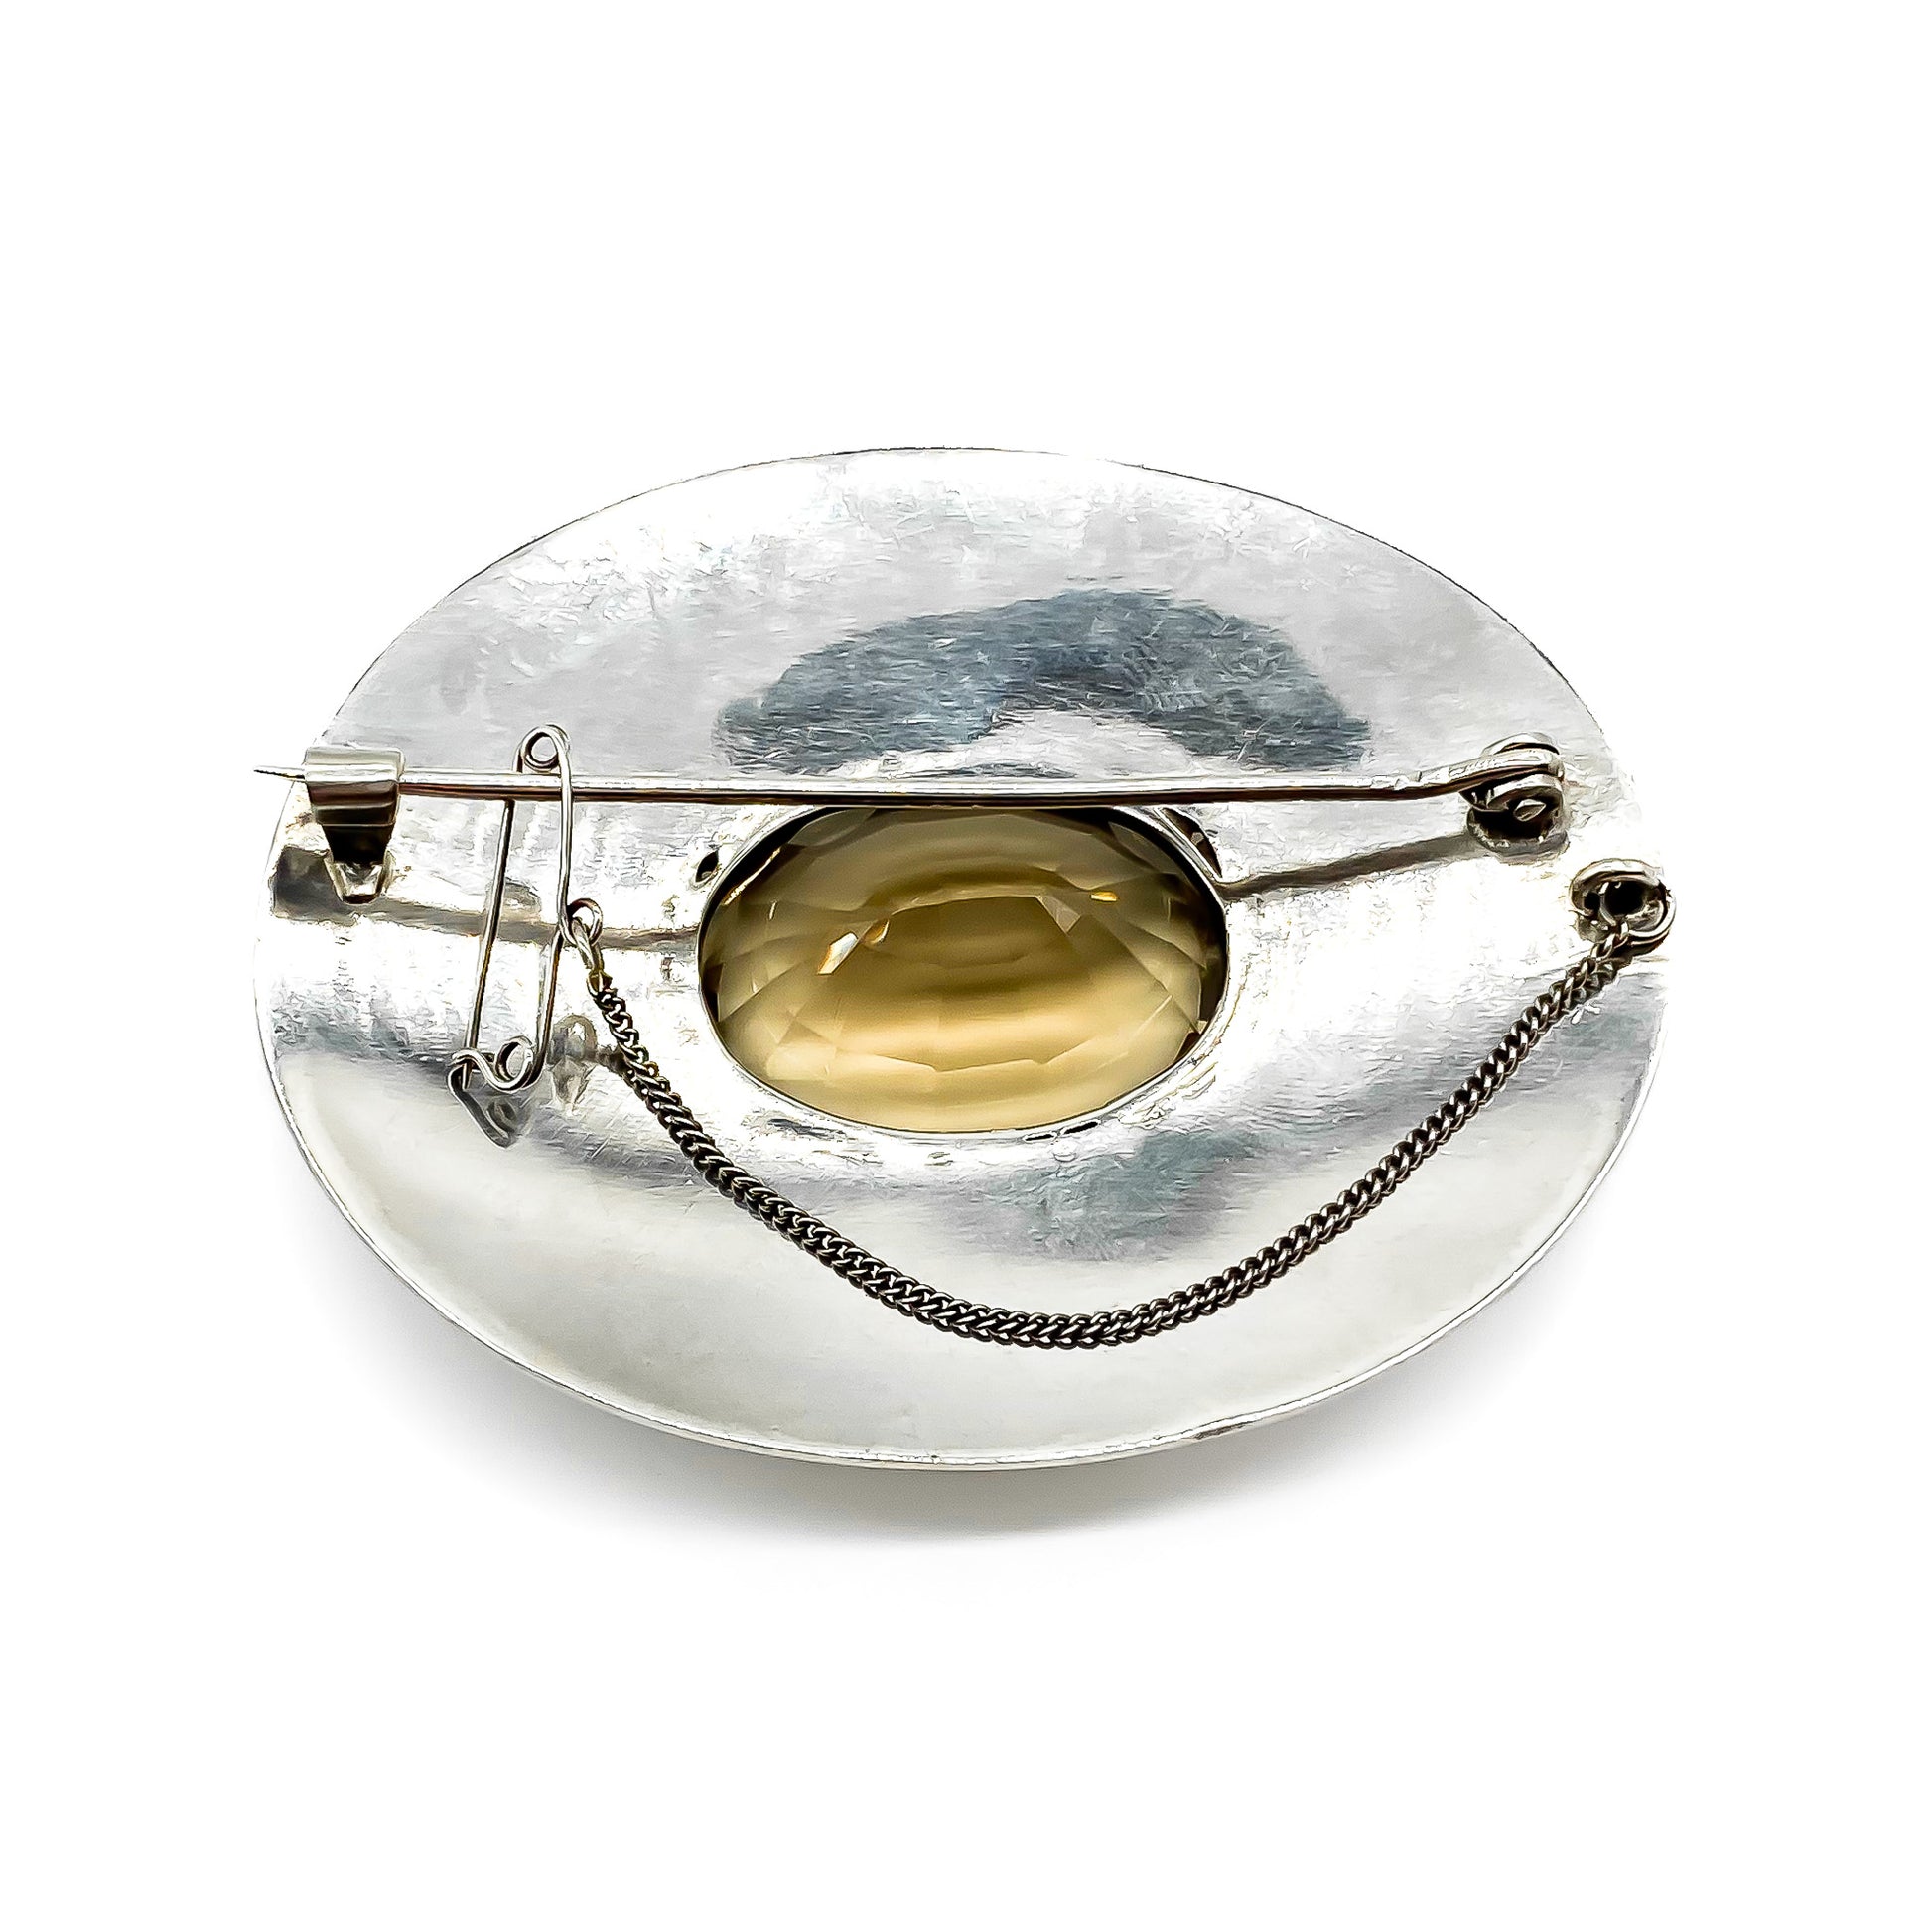 Impressive vintage silver handmade brooch set with a beautifully faceted oval smoky quartz.   Circa 1950’s